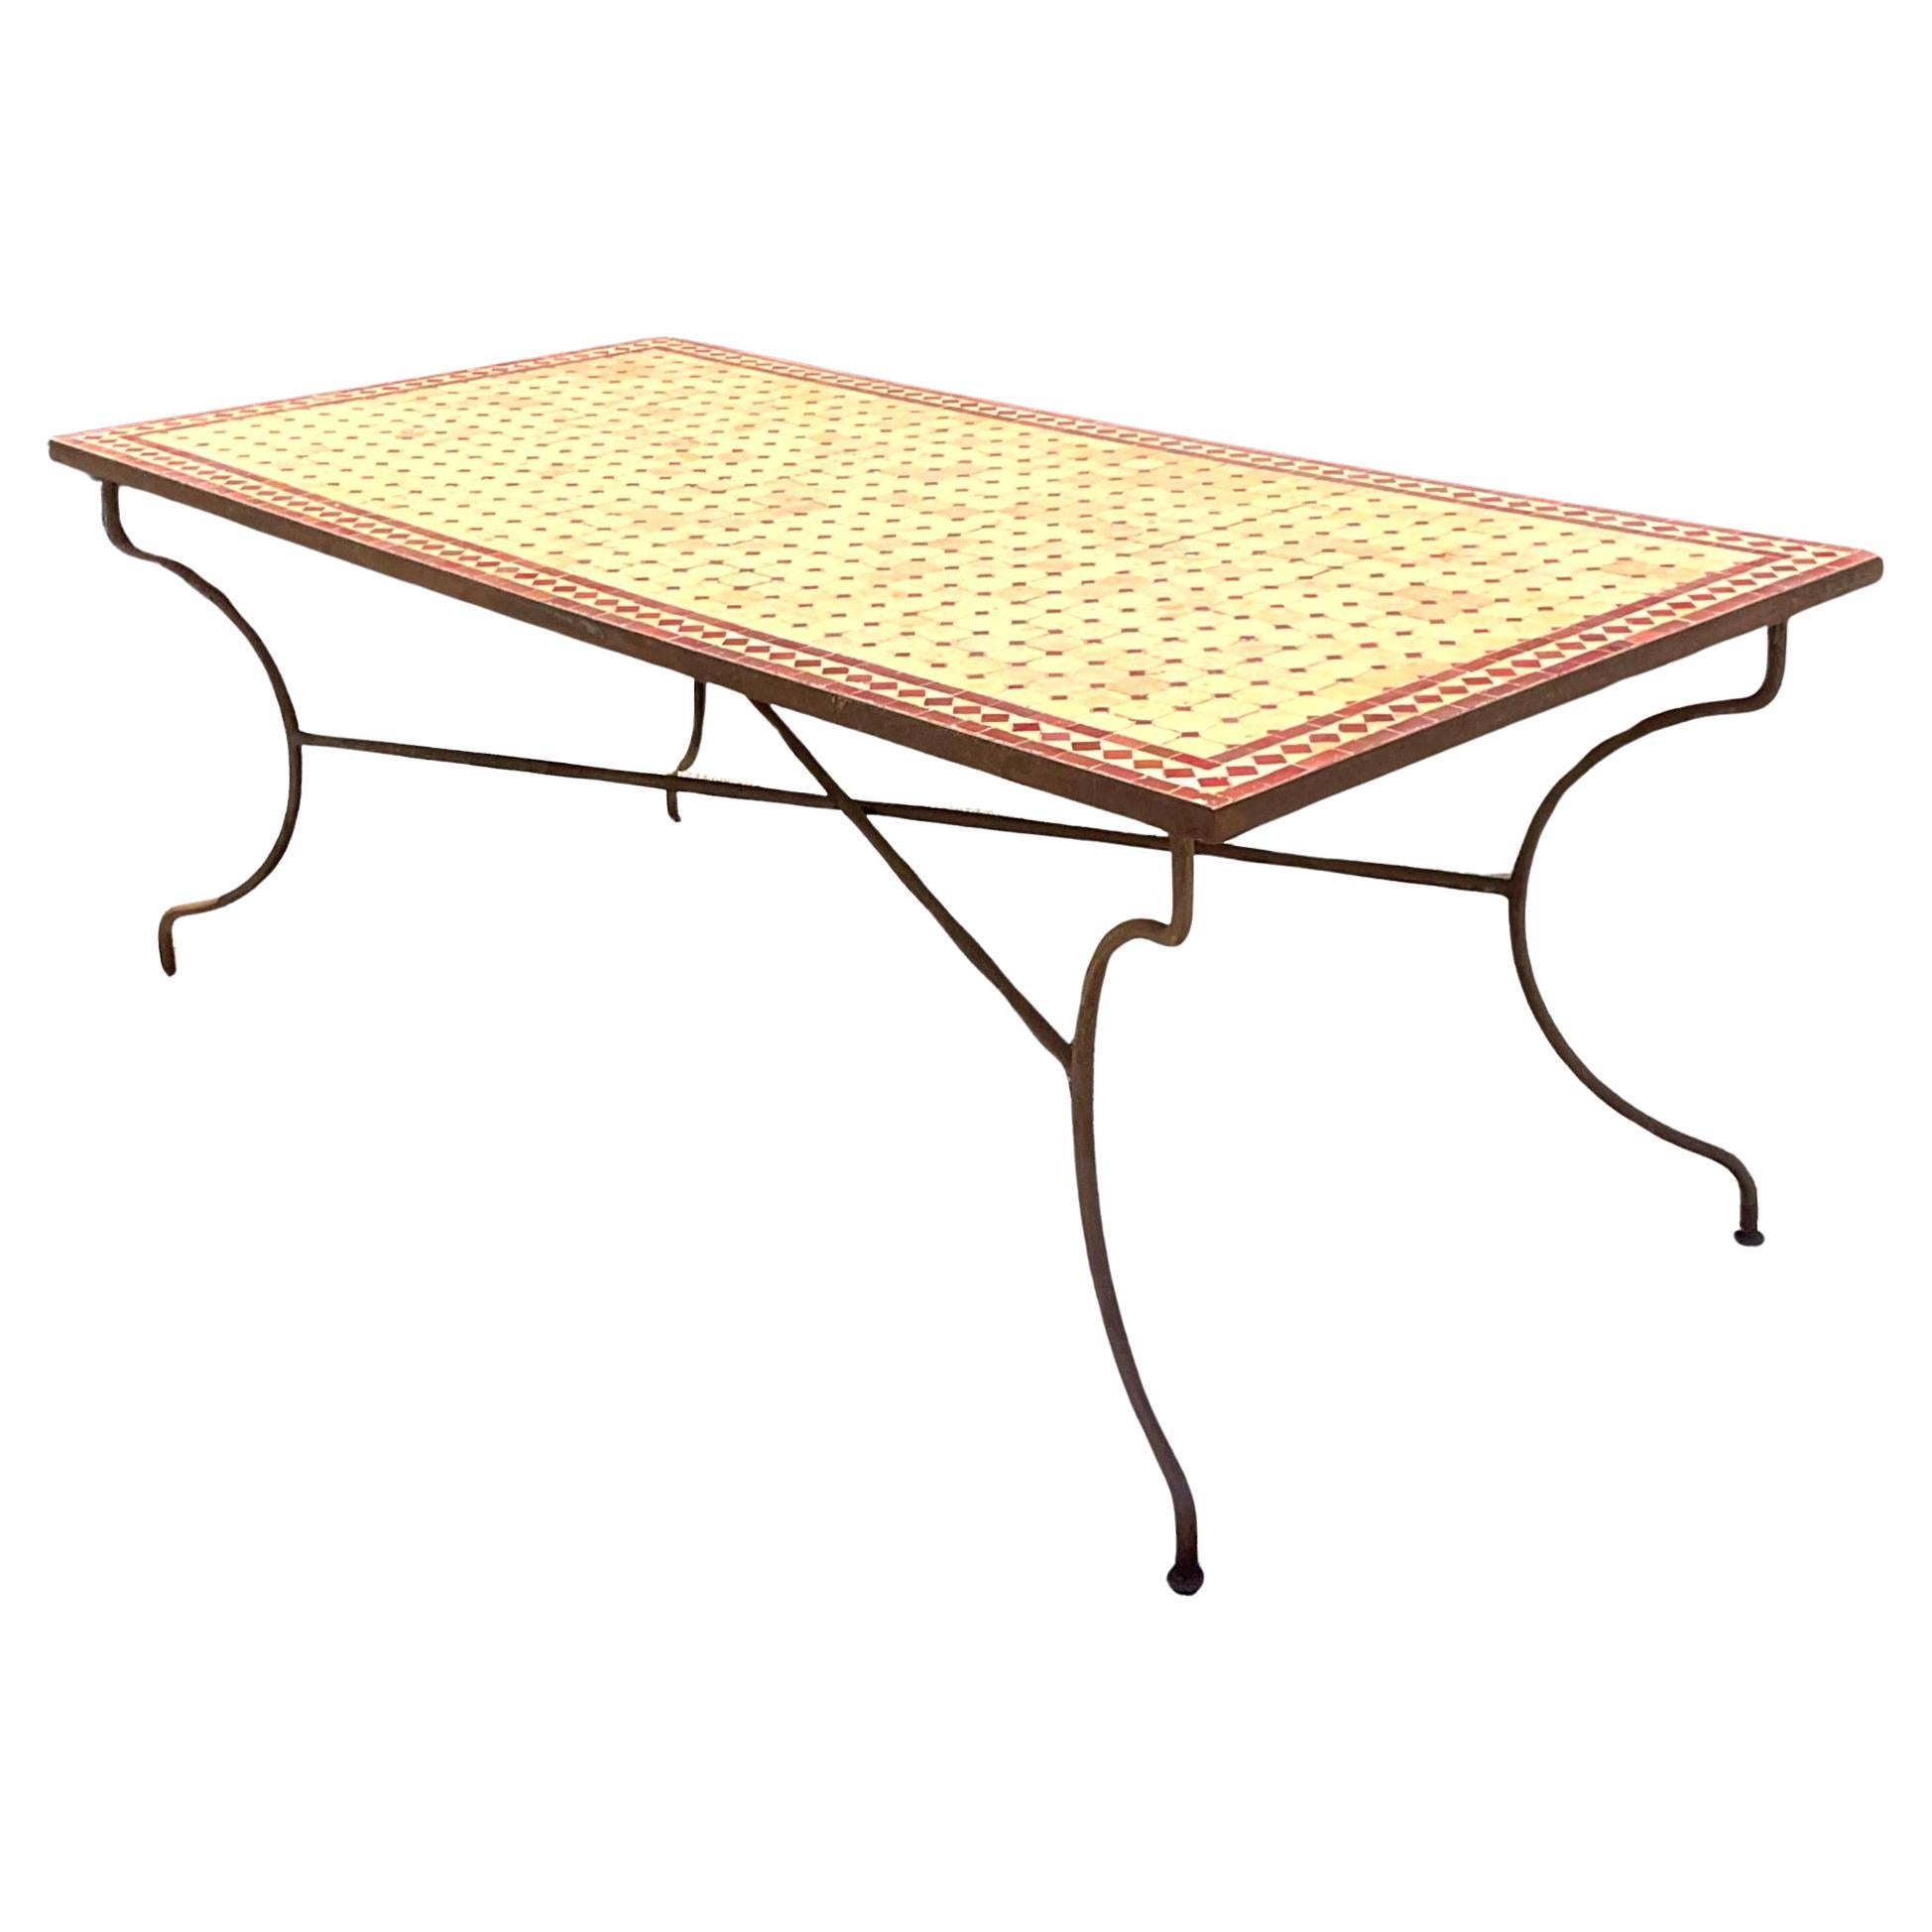 Late 20th Century Vintage Boho Moroccan Tile Dining Table